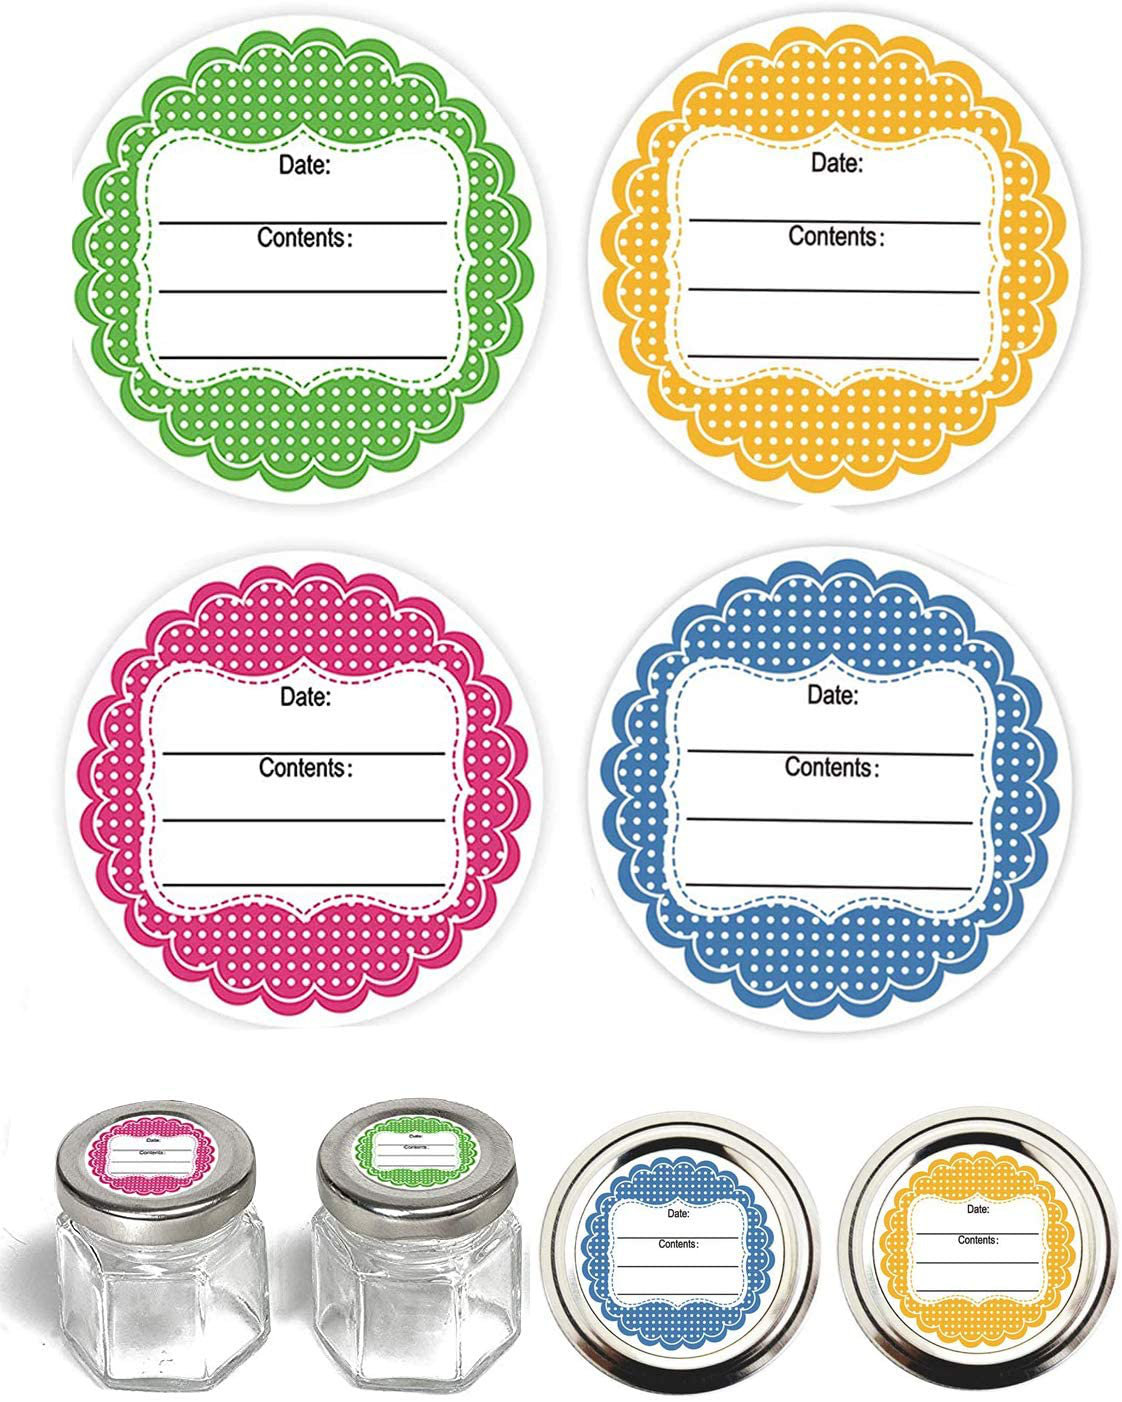 2 Inch Round Canning Labels,Containers Labels,Labels for Mason Jar,Bottles,Writable Food Stickers,Set of 80